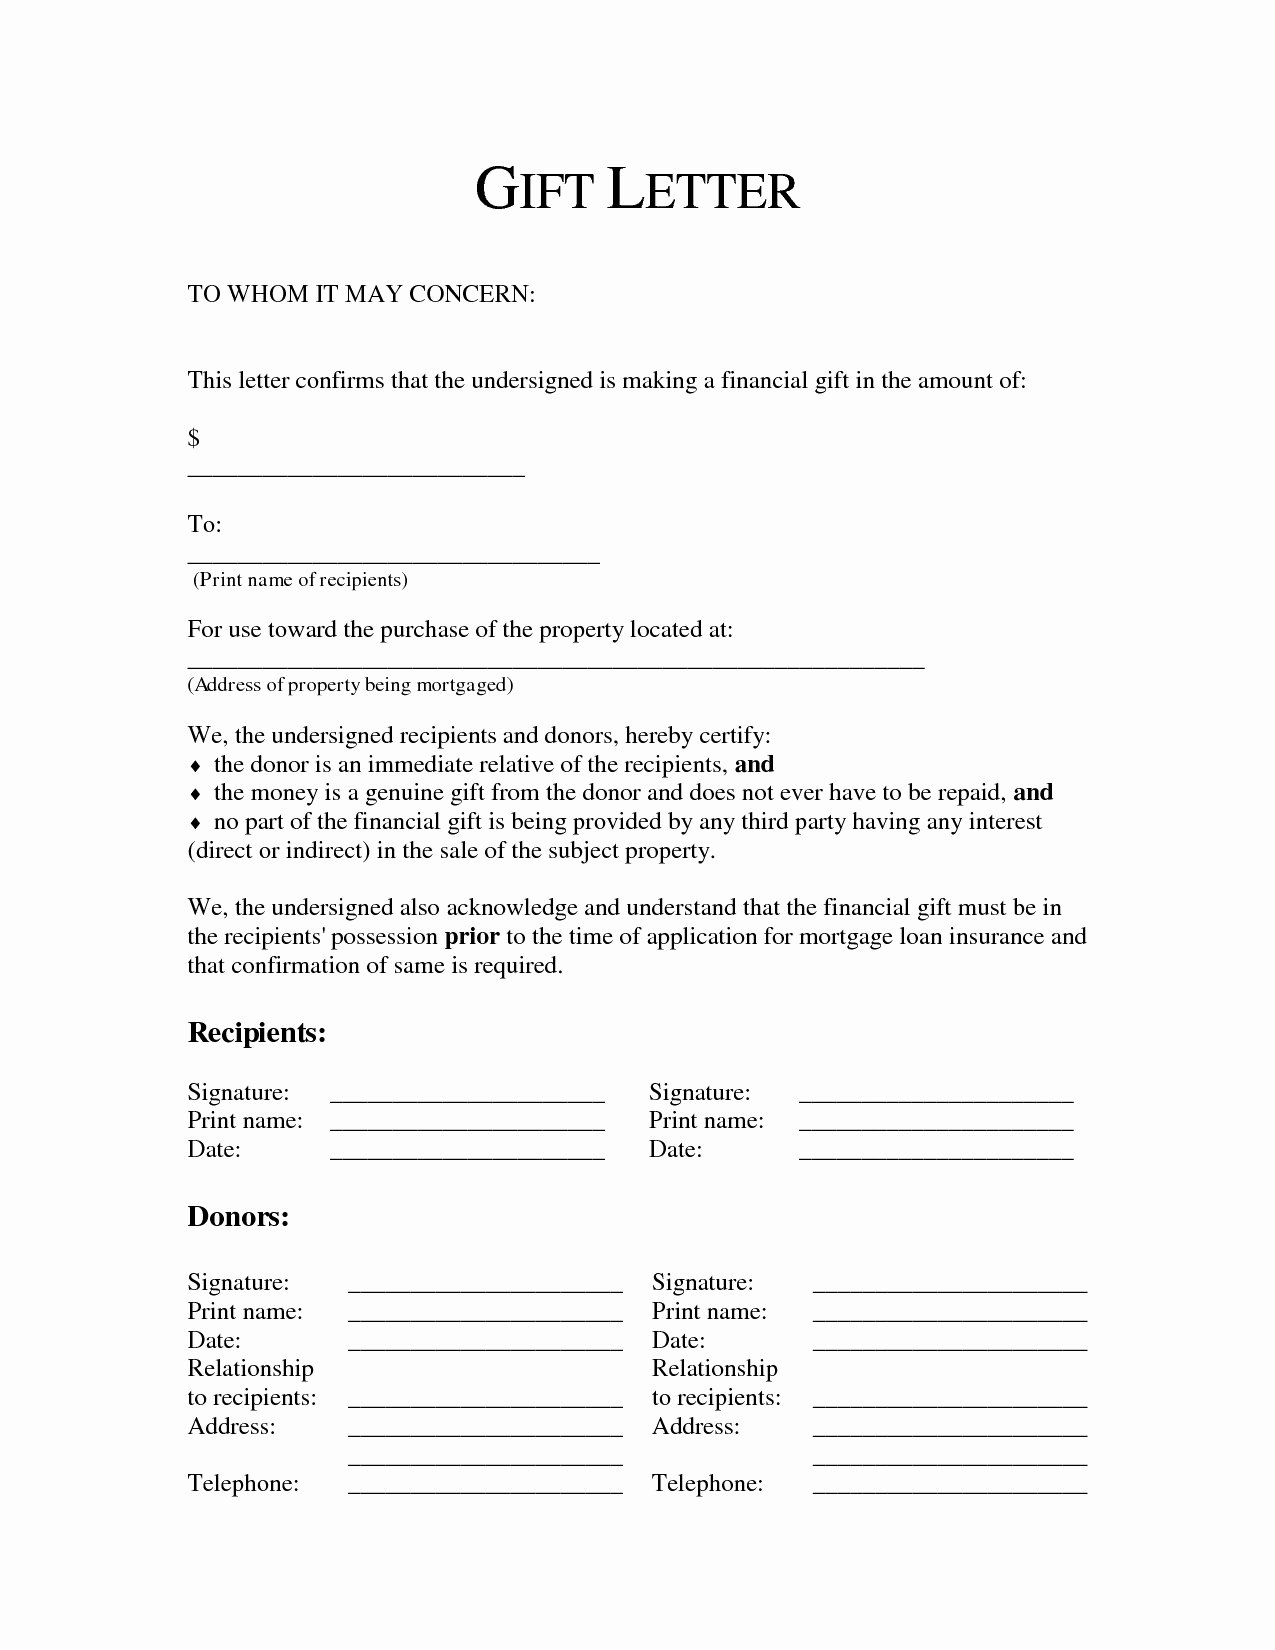 Mortgage Gift Letter Template New Gift Letter for Mortgage